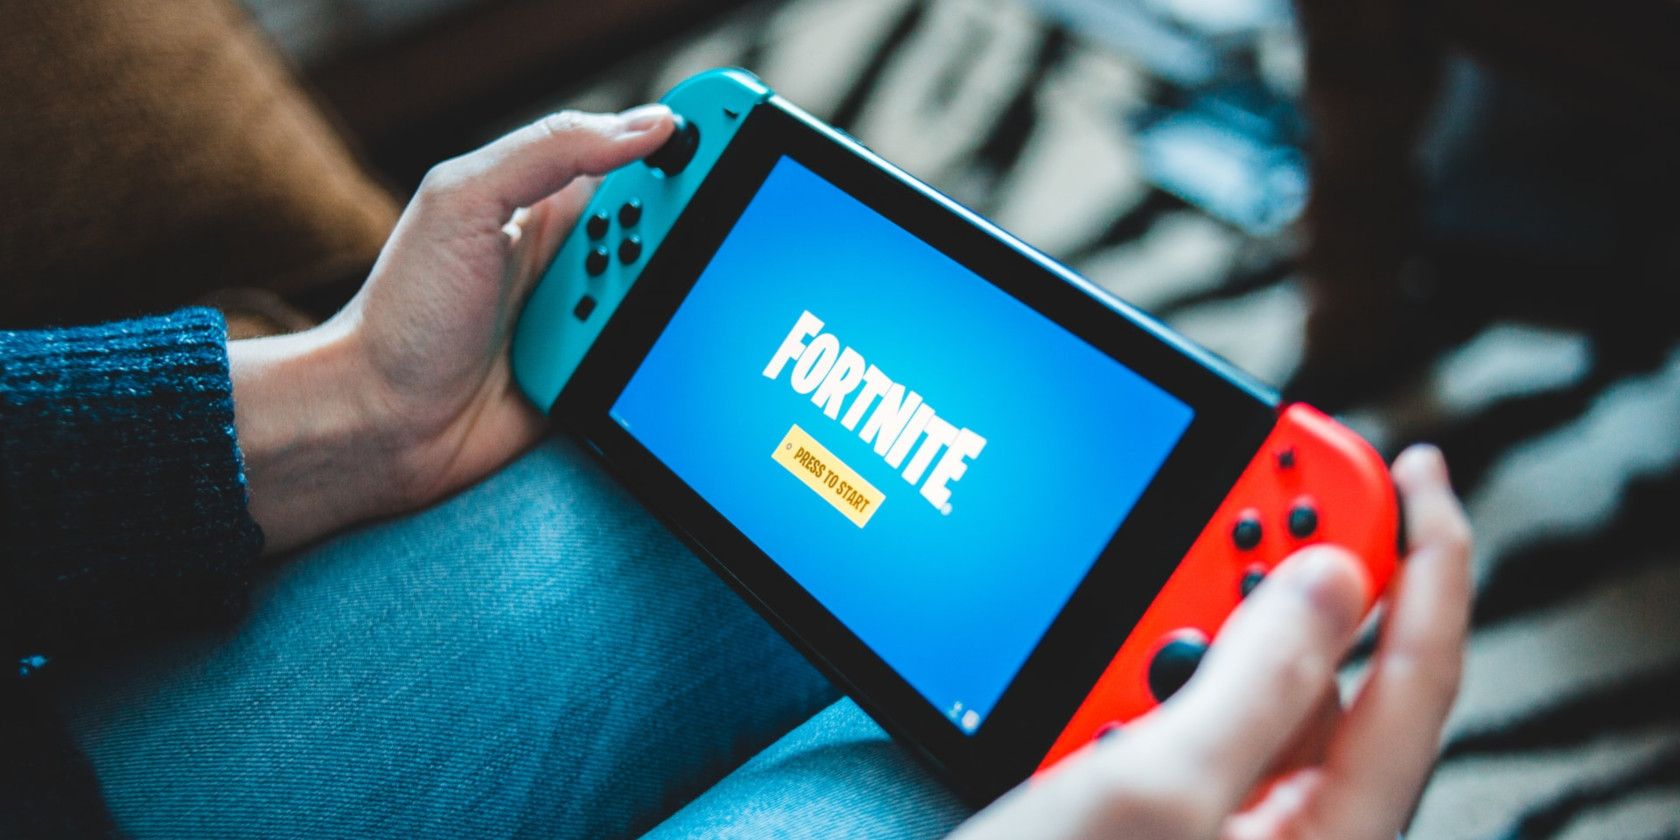 Fortnite on the Nintendo Switch